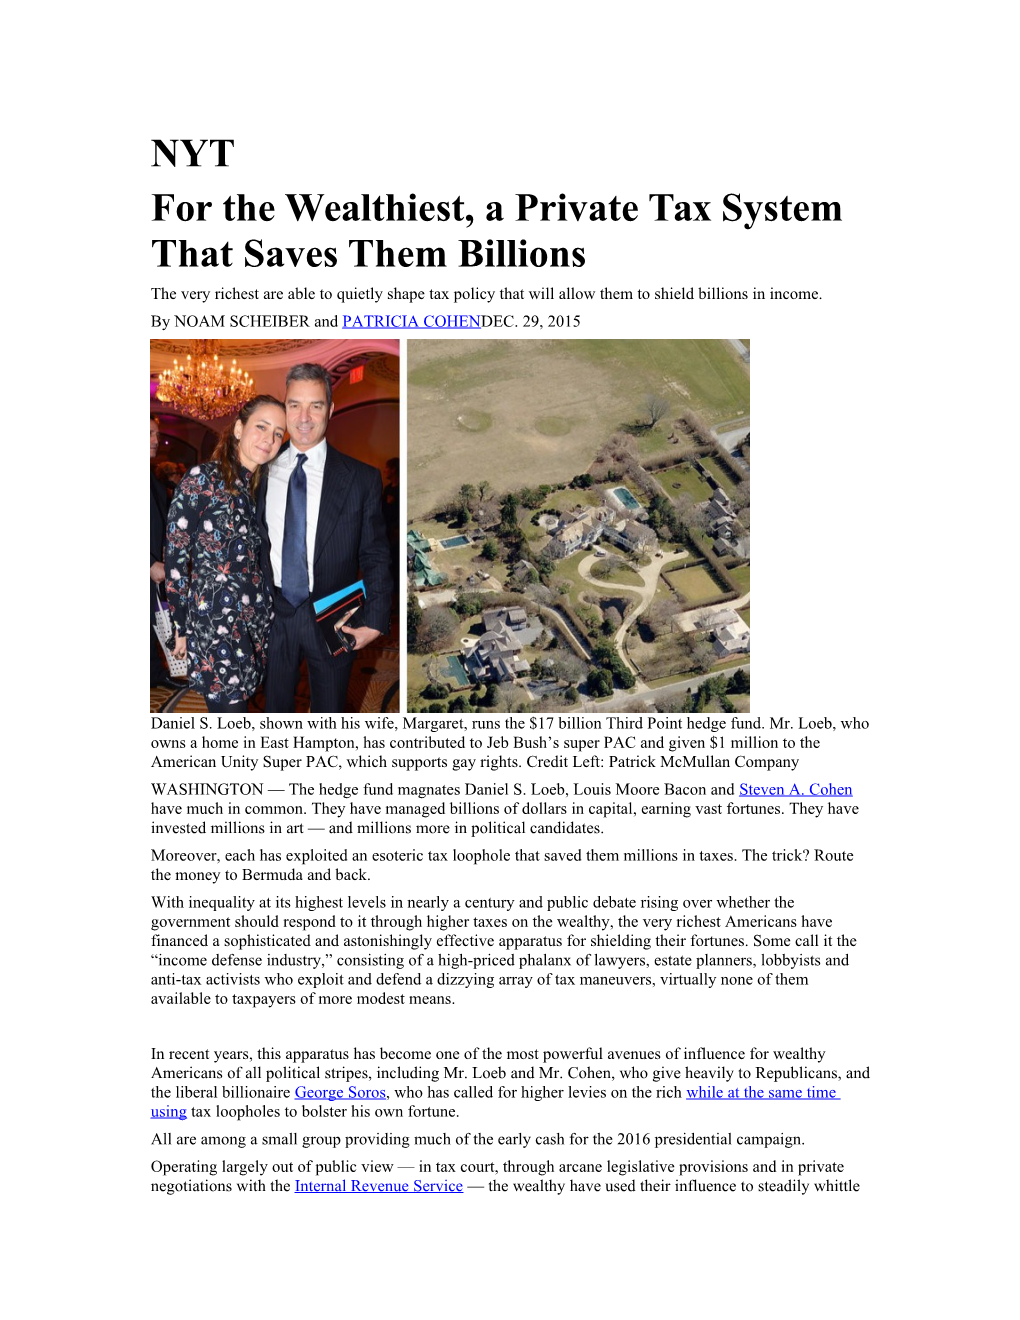 For the Wealthiest, a Private Tax System That Saves Them Billions